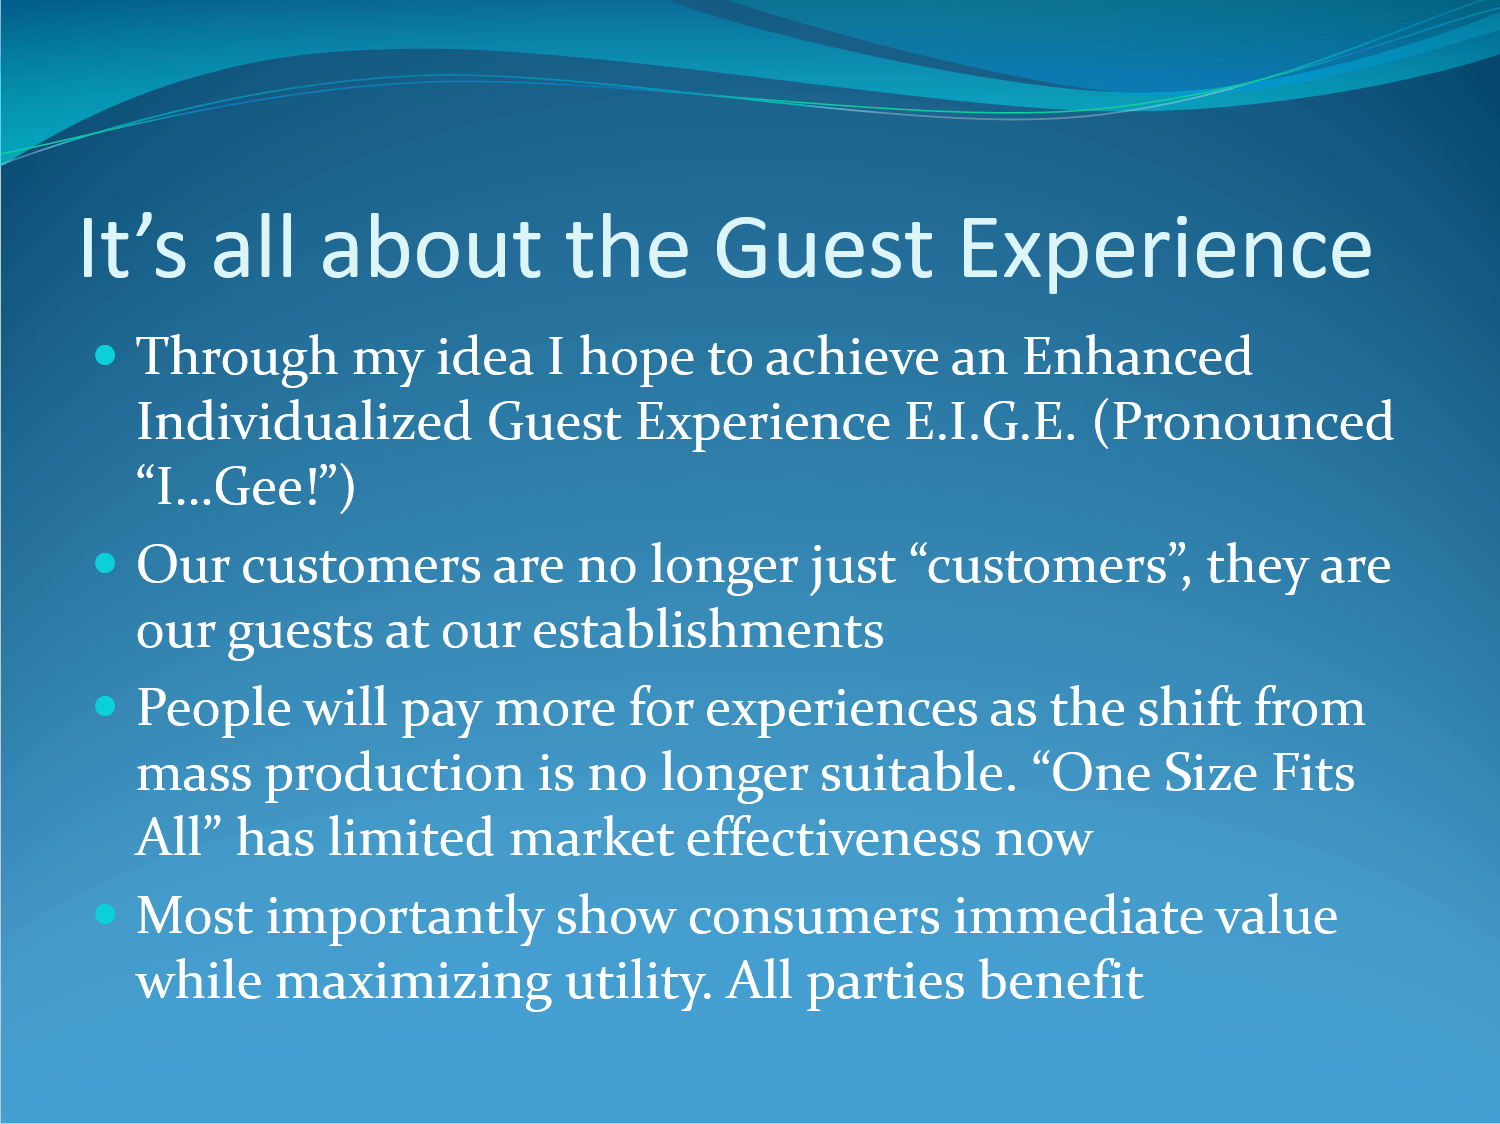 Powerpoint slide from Enterprise Holdings' subscription model by Bilal Qizilbash showcasing the concept of the guest experience in text.